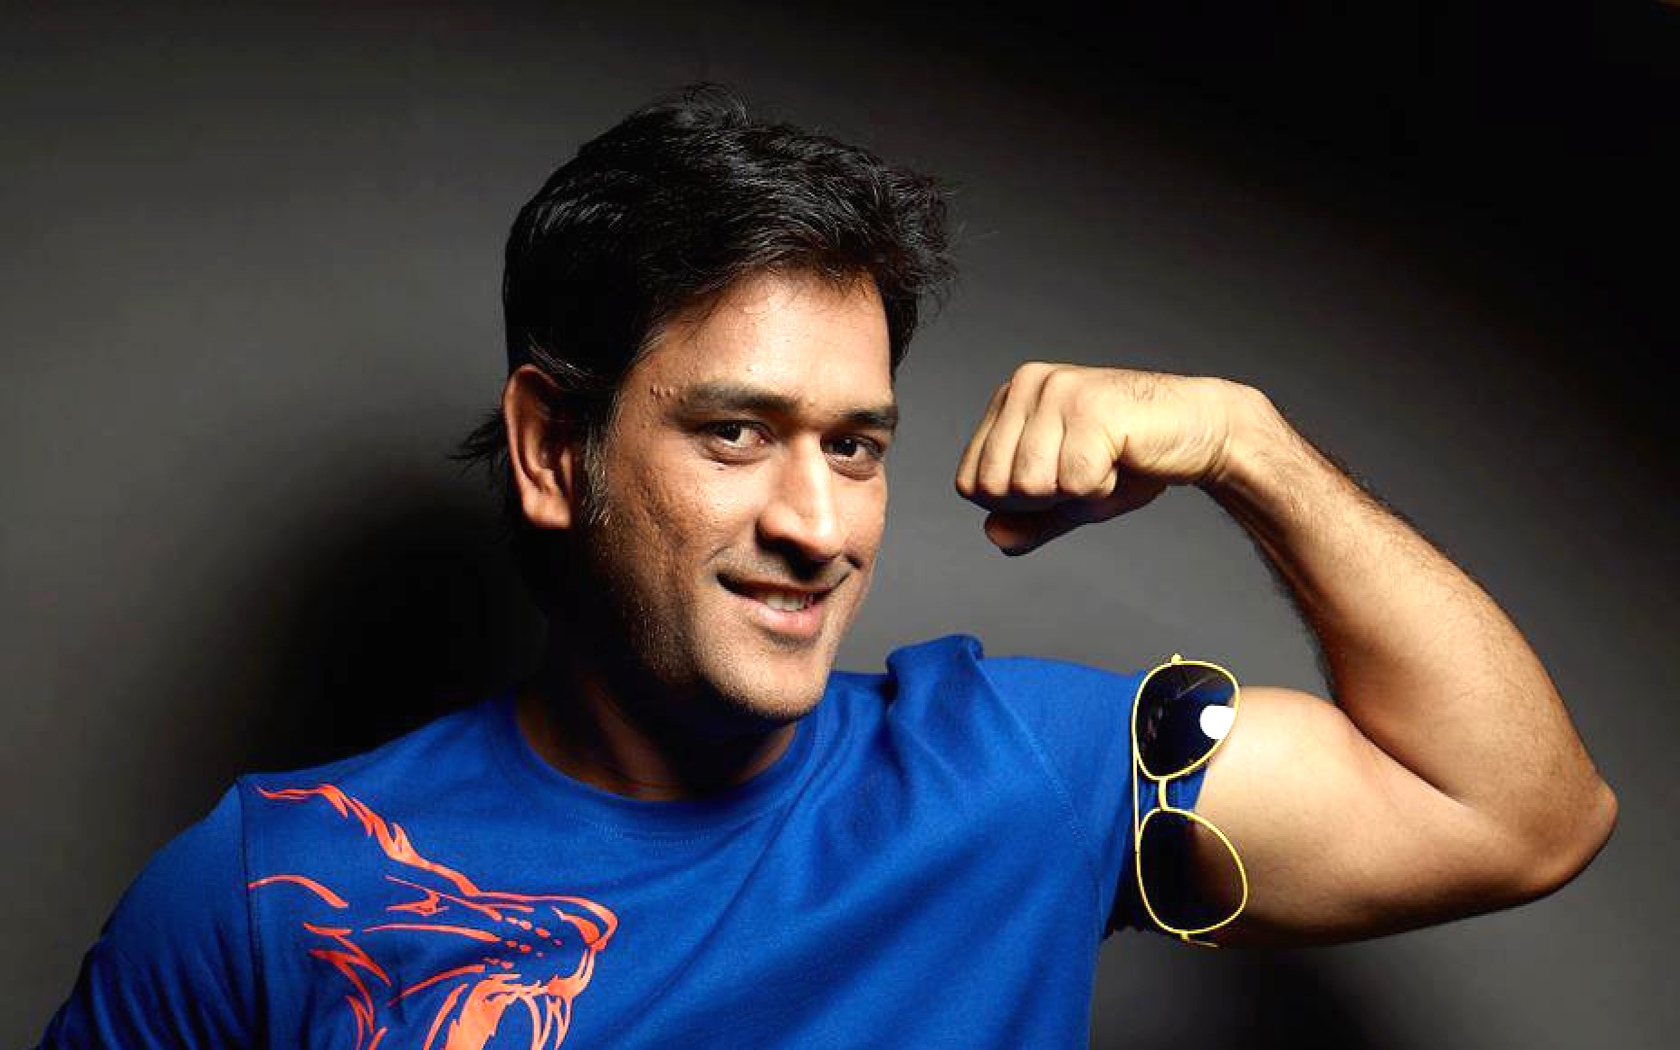 Mahendra Singh Dhoni new latest hd wallpapers wide 1080p for